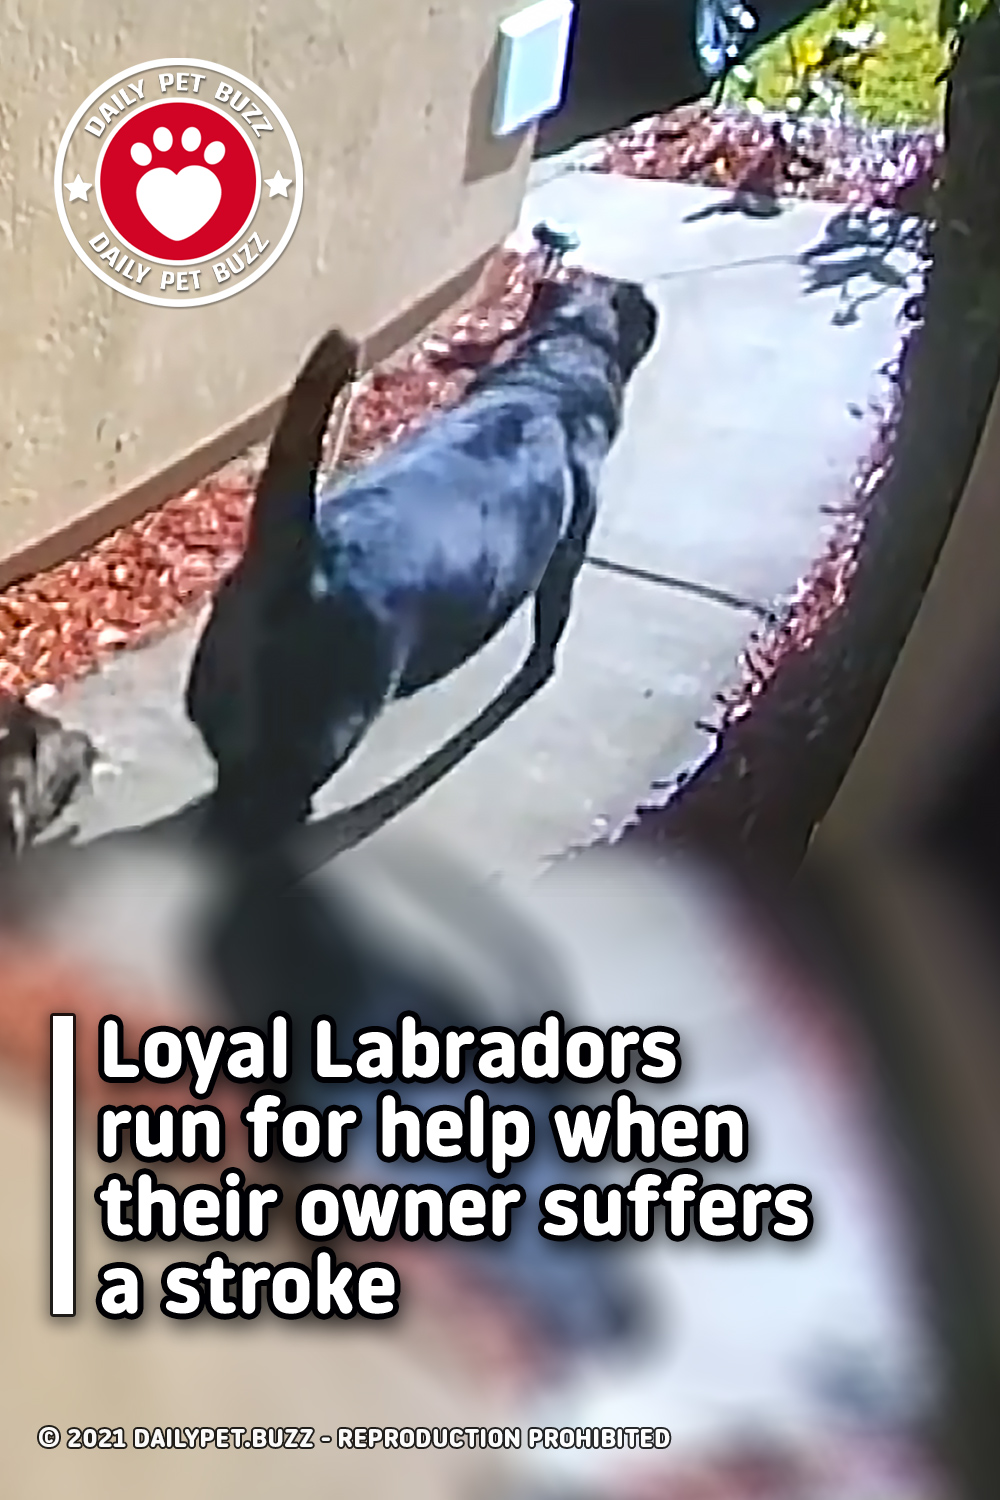 Loyal Labradors run for help when their owner suffers a stroke